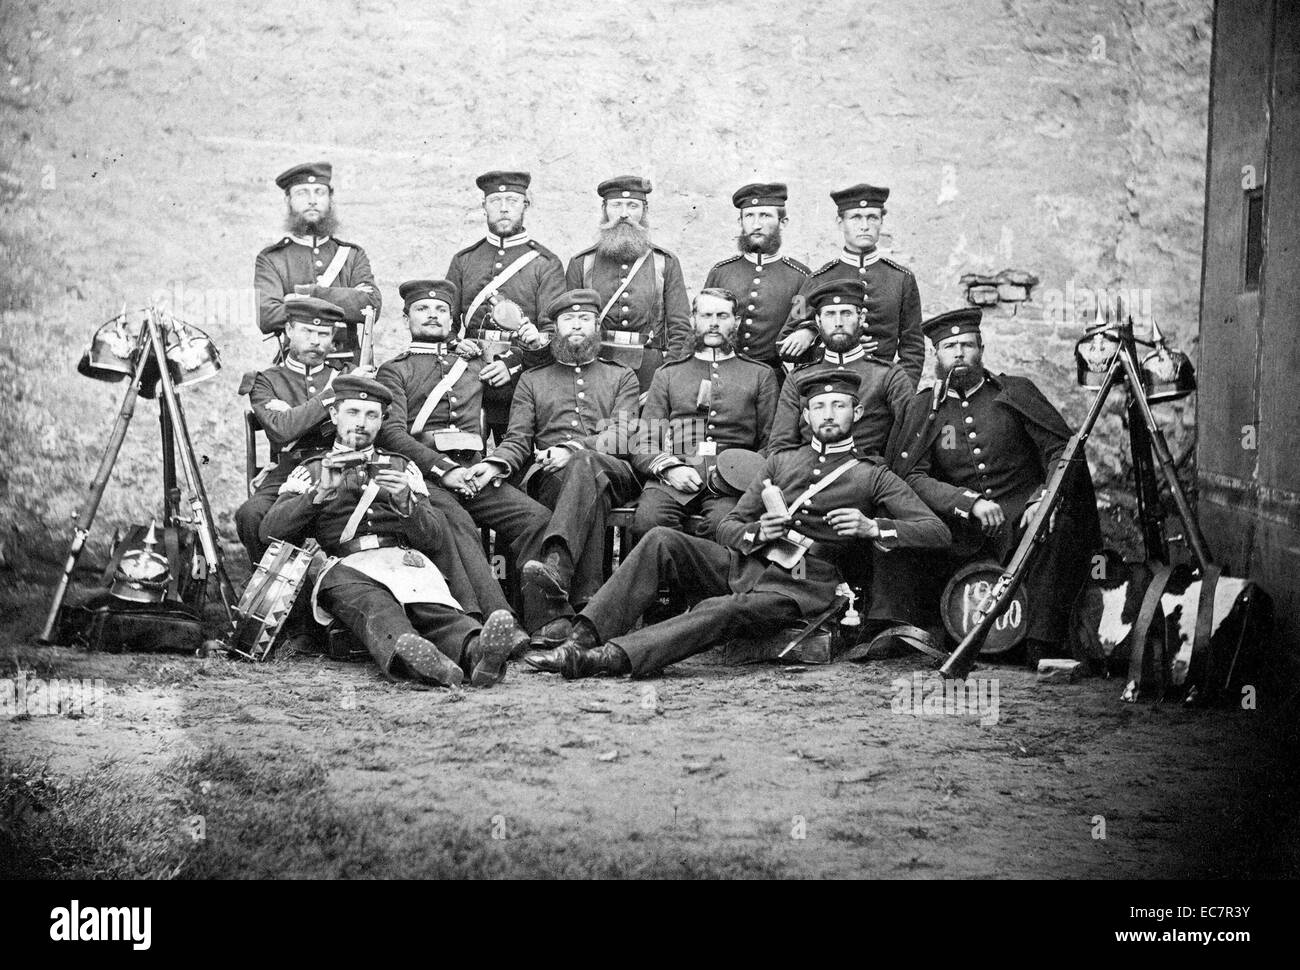 Prussian soldiers photographed during the Austro-Prussian war of 1866. Stock Photo